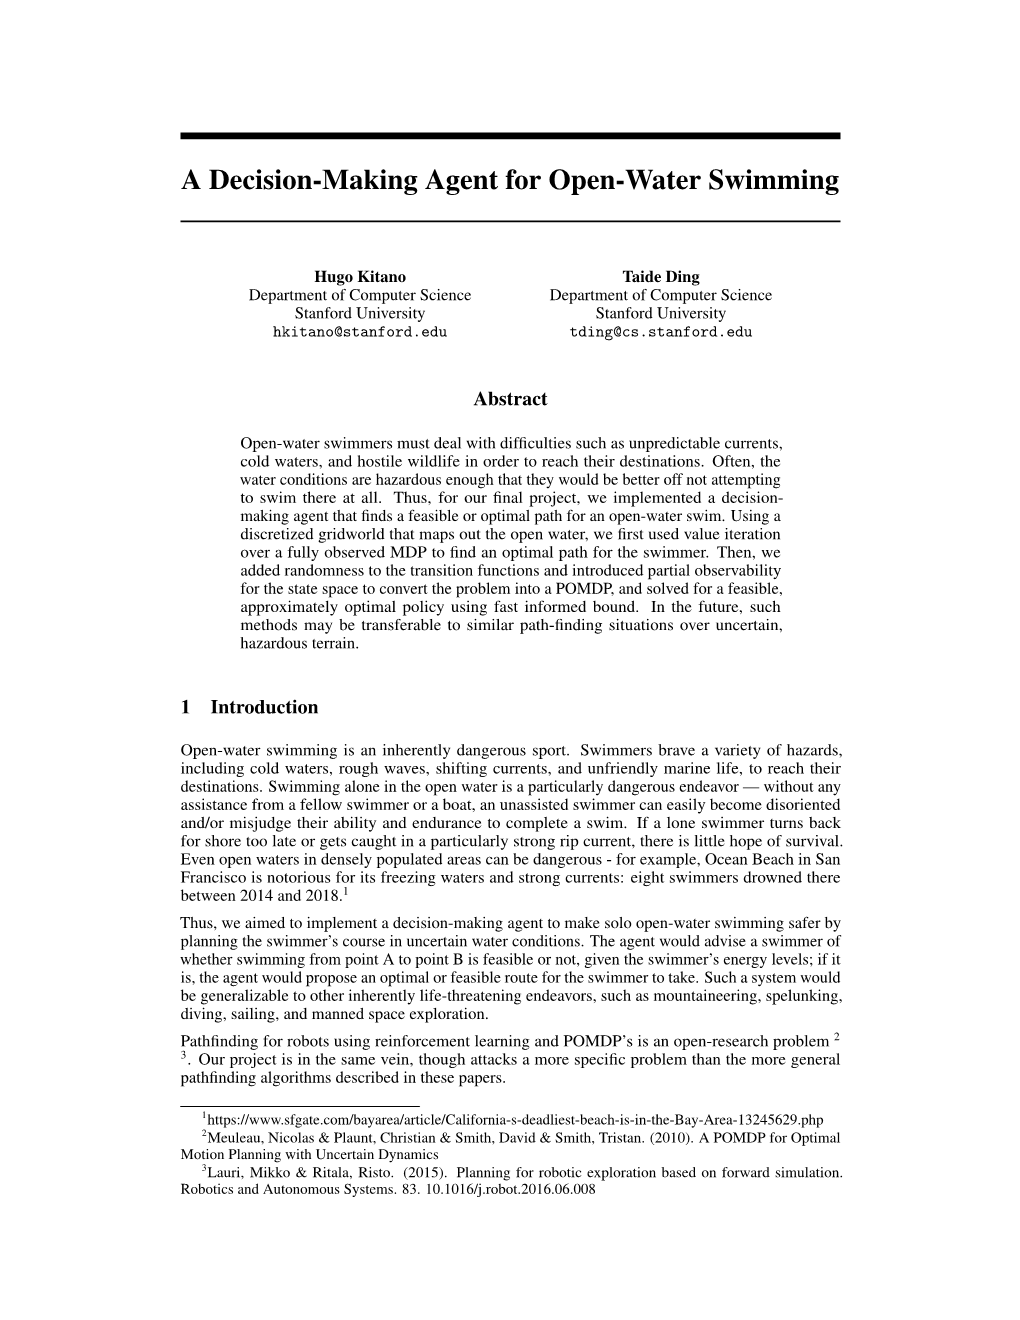 A Decision-Making Agent for Open-Water Swimming